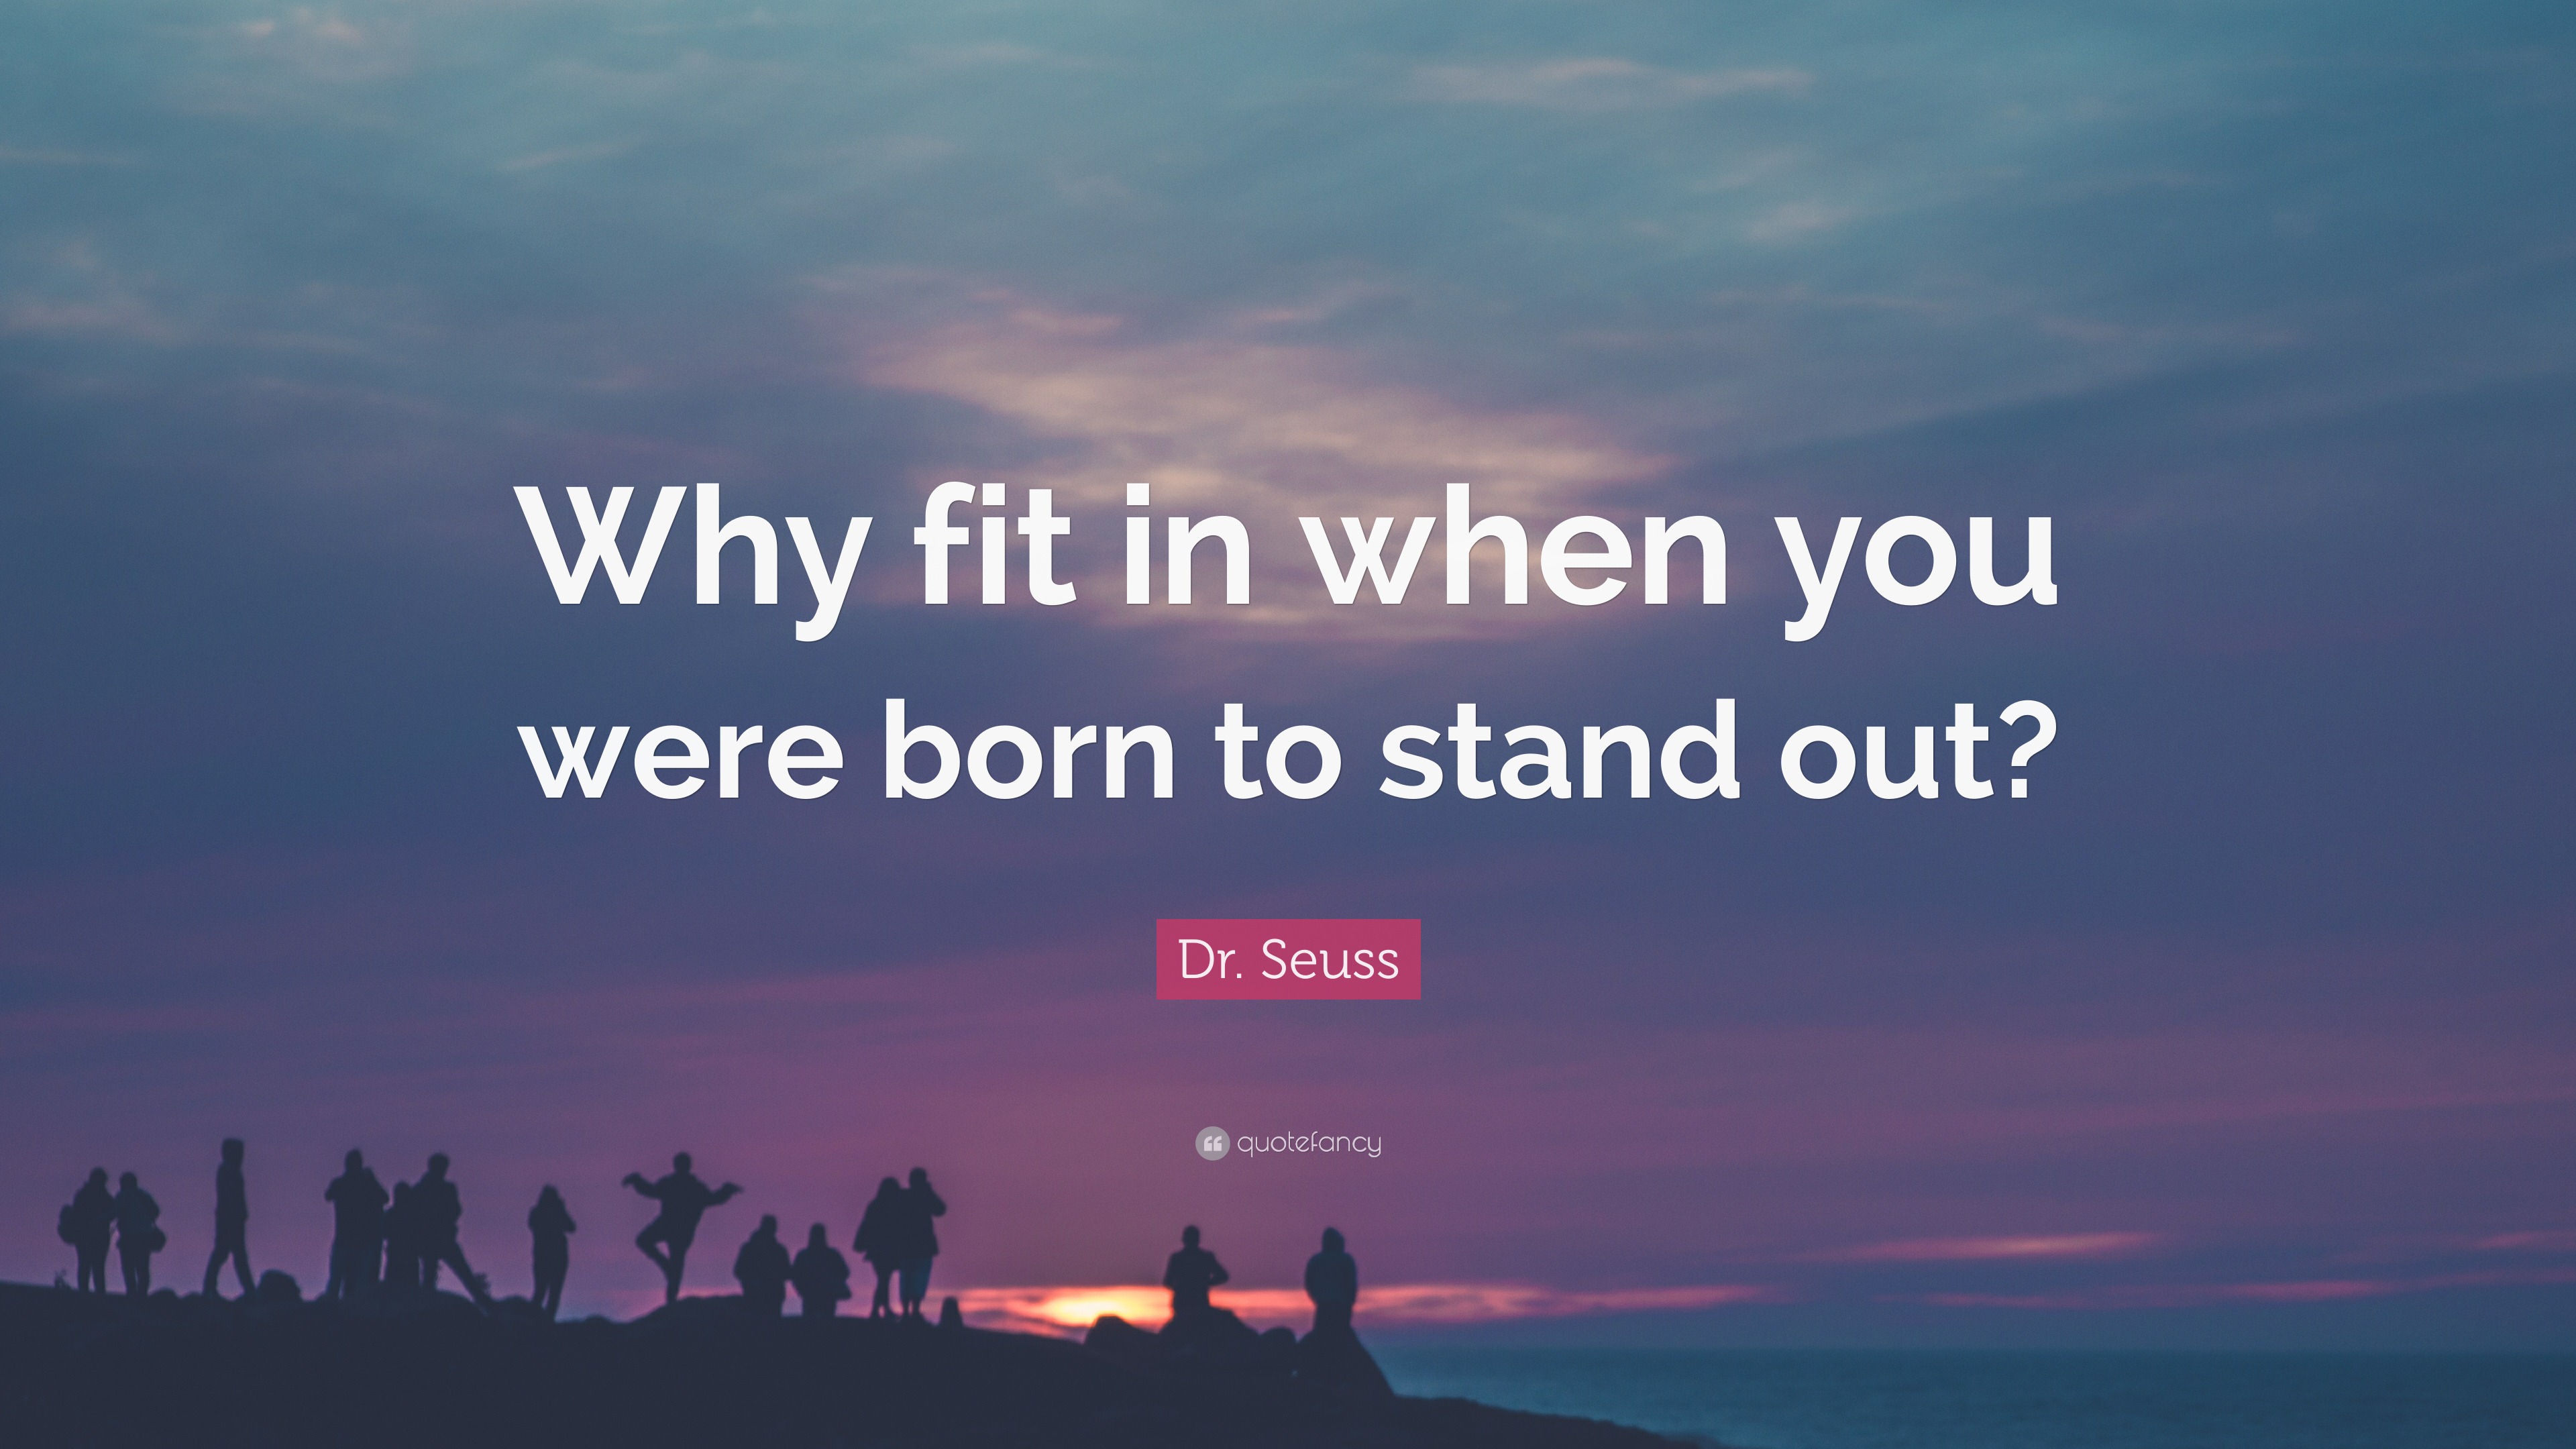 Dr. Seuss Quote: “Why fit in when you were born to stand out?”